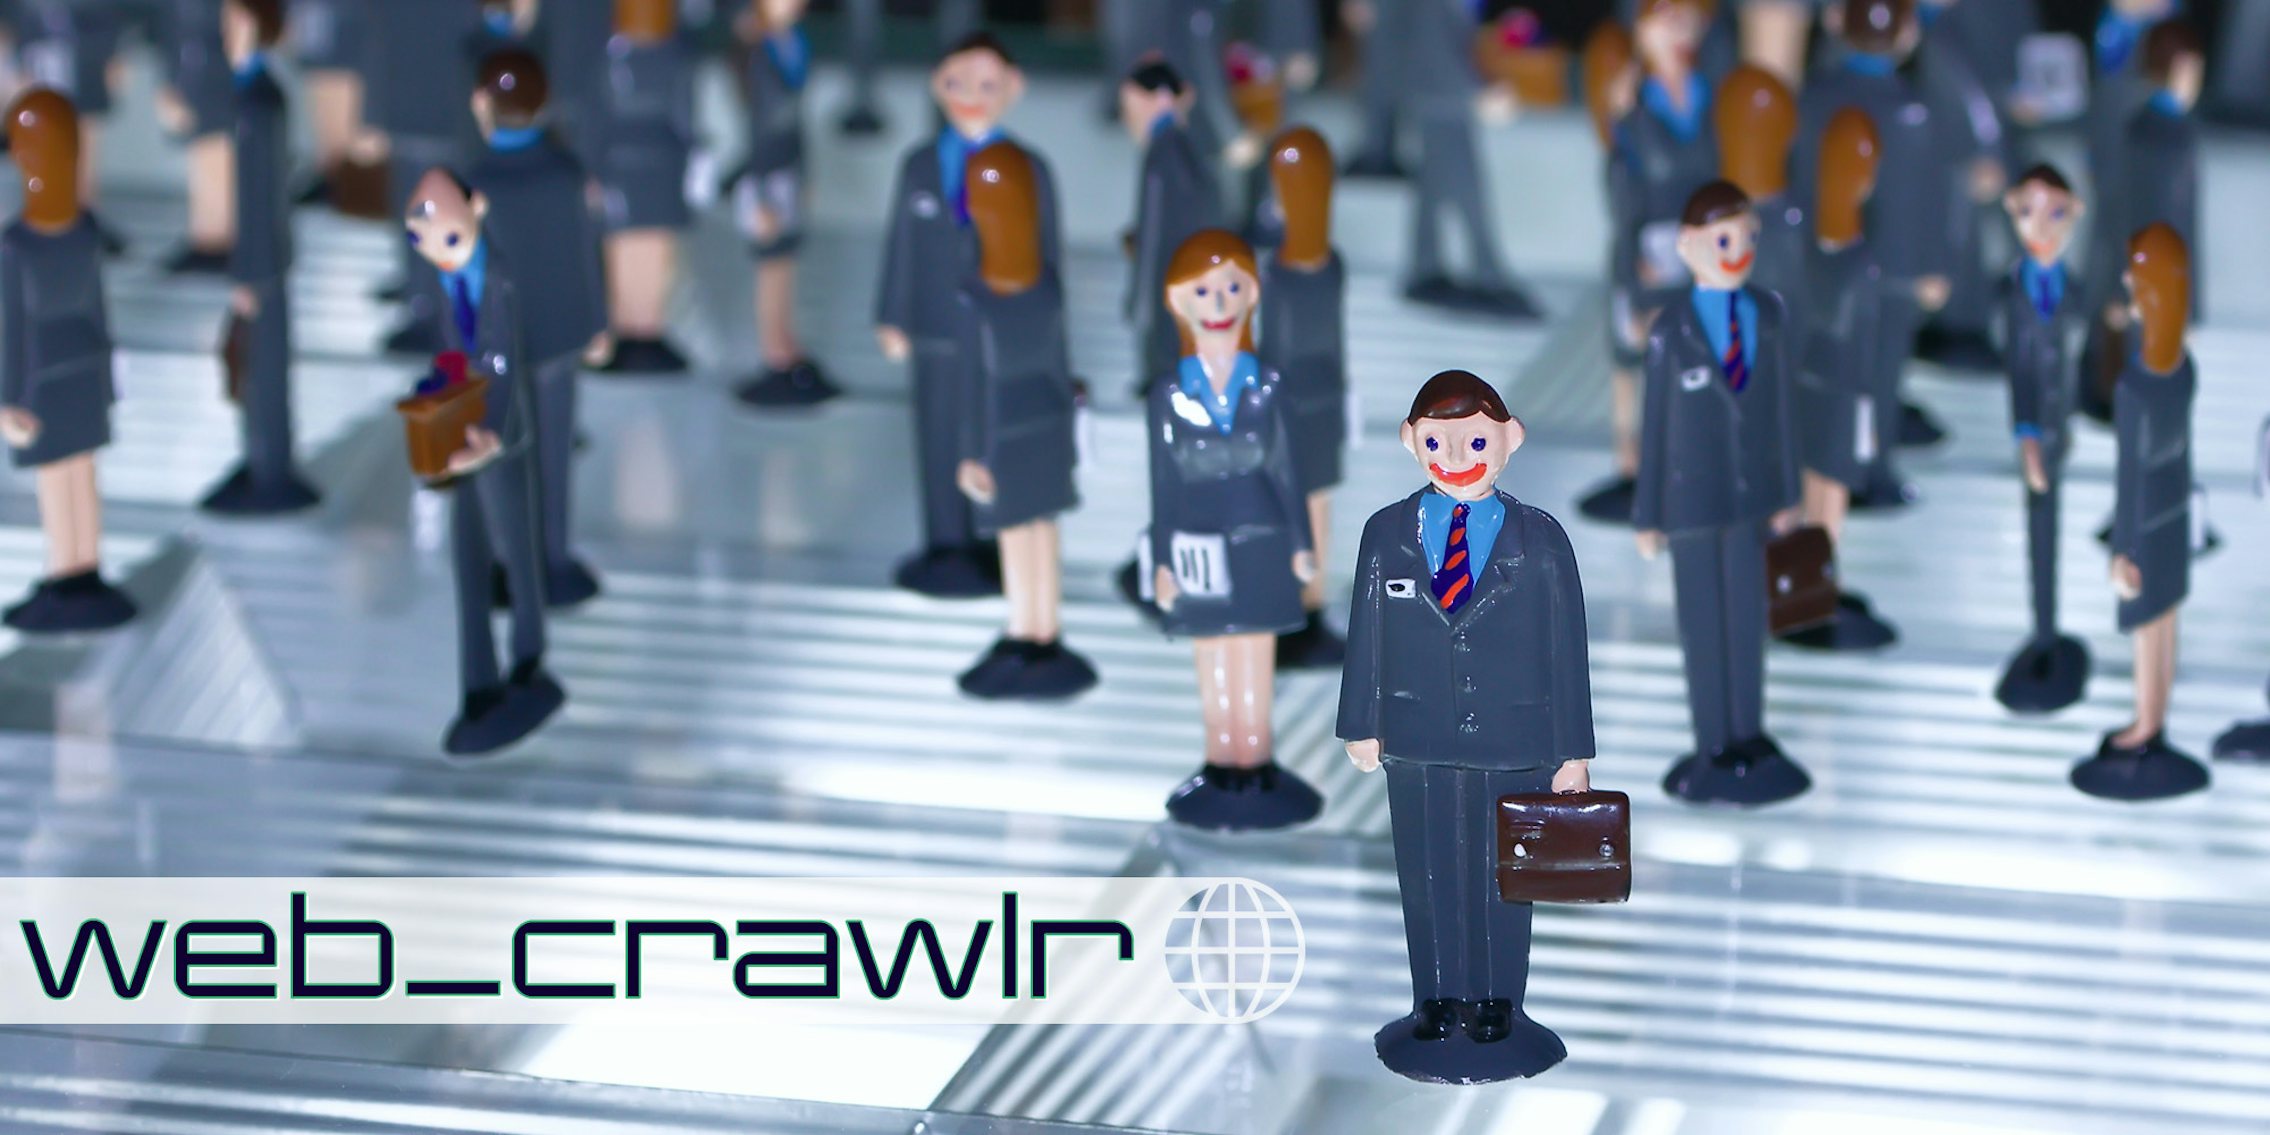 Business people figurines on a glass table. The Daily Dot newsletter web_crawlr logo is in the bottom left corner.